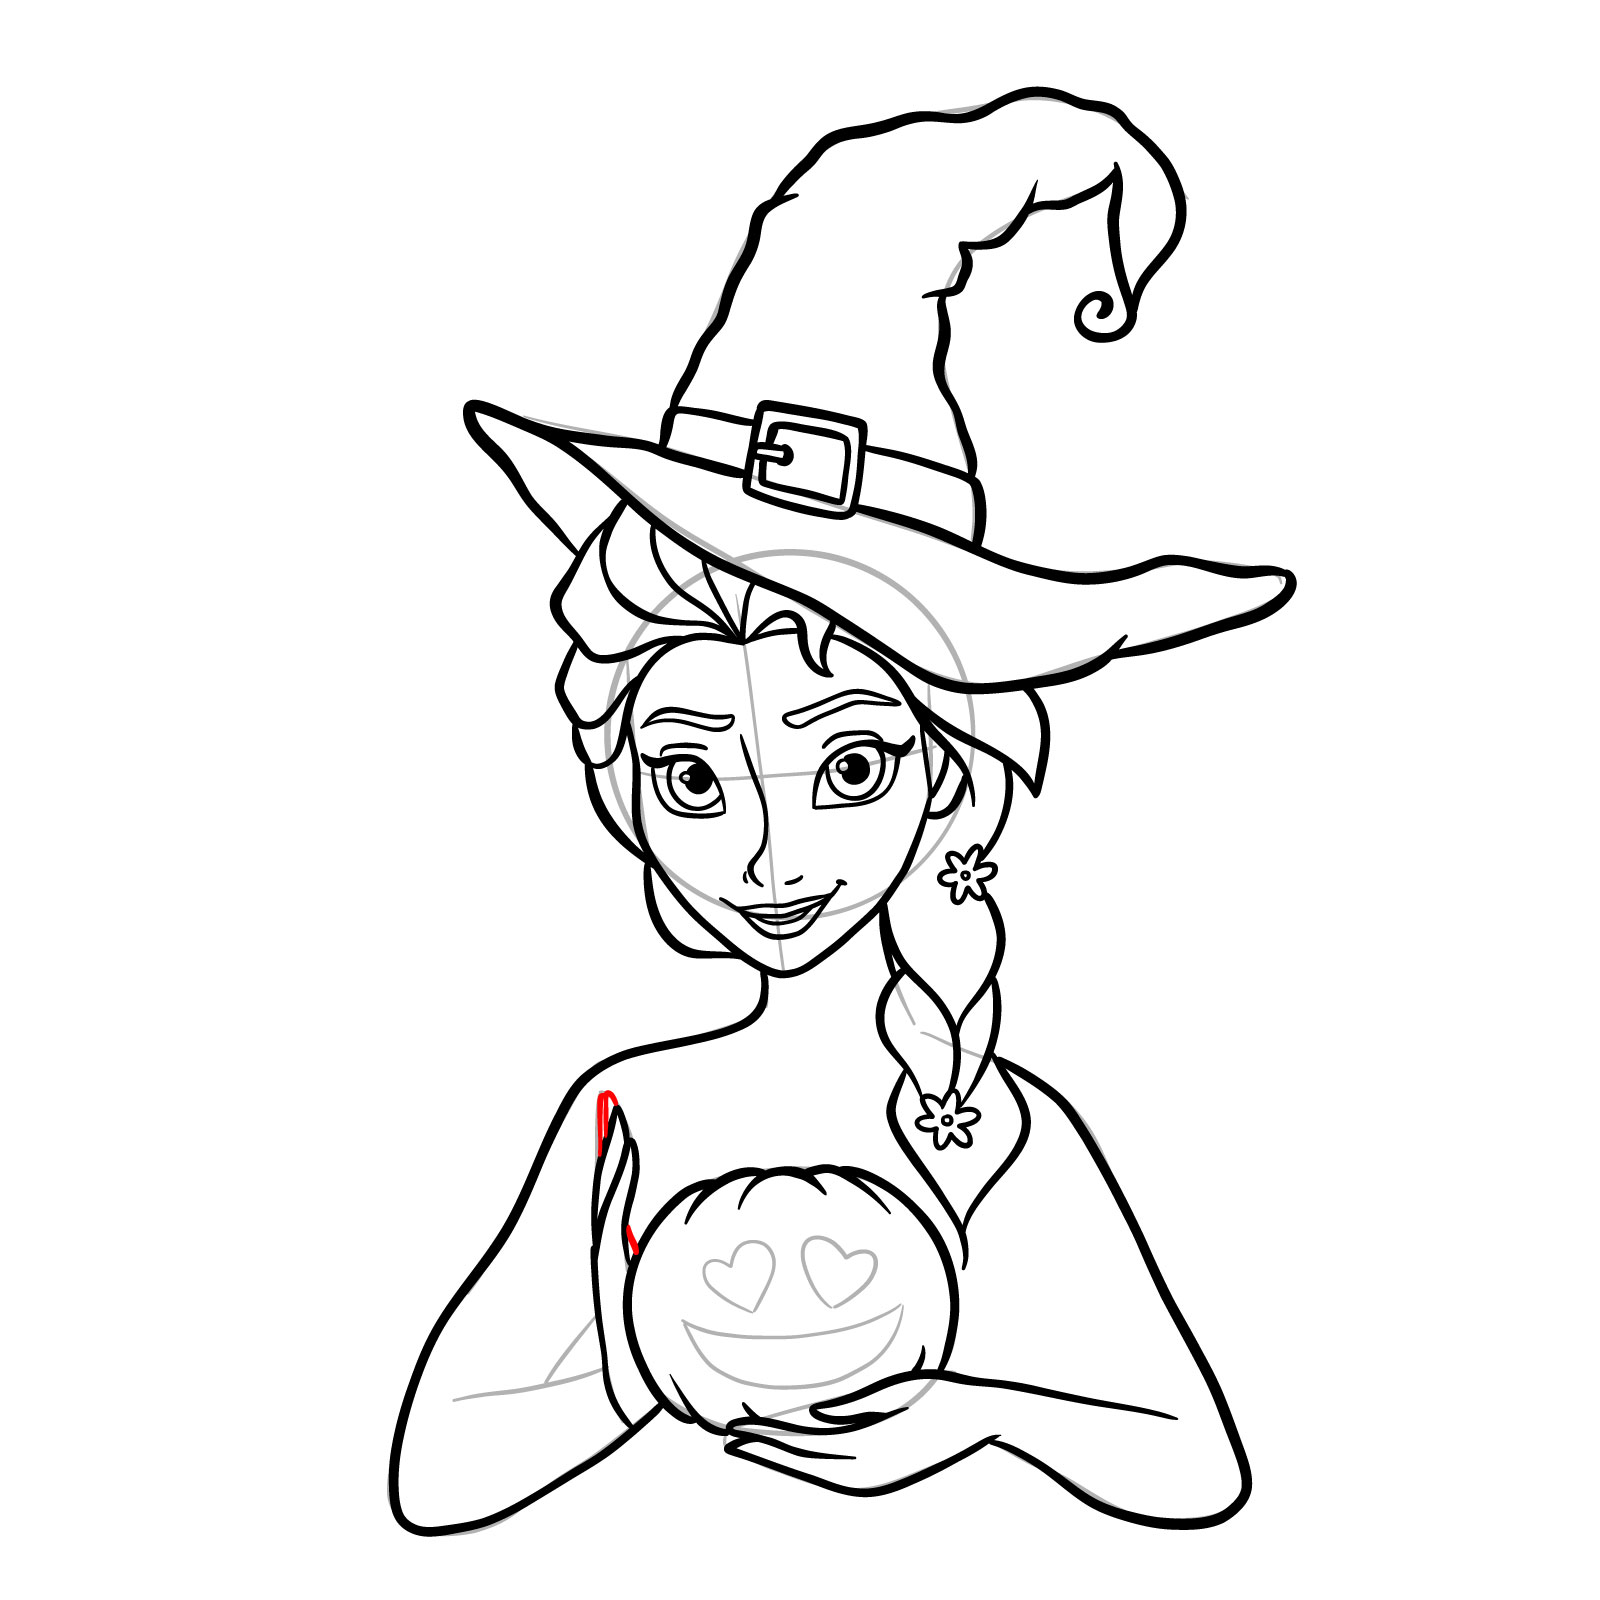 How to Draw Witch Elsa on Halloween - step 25